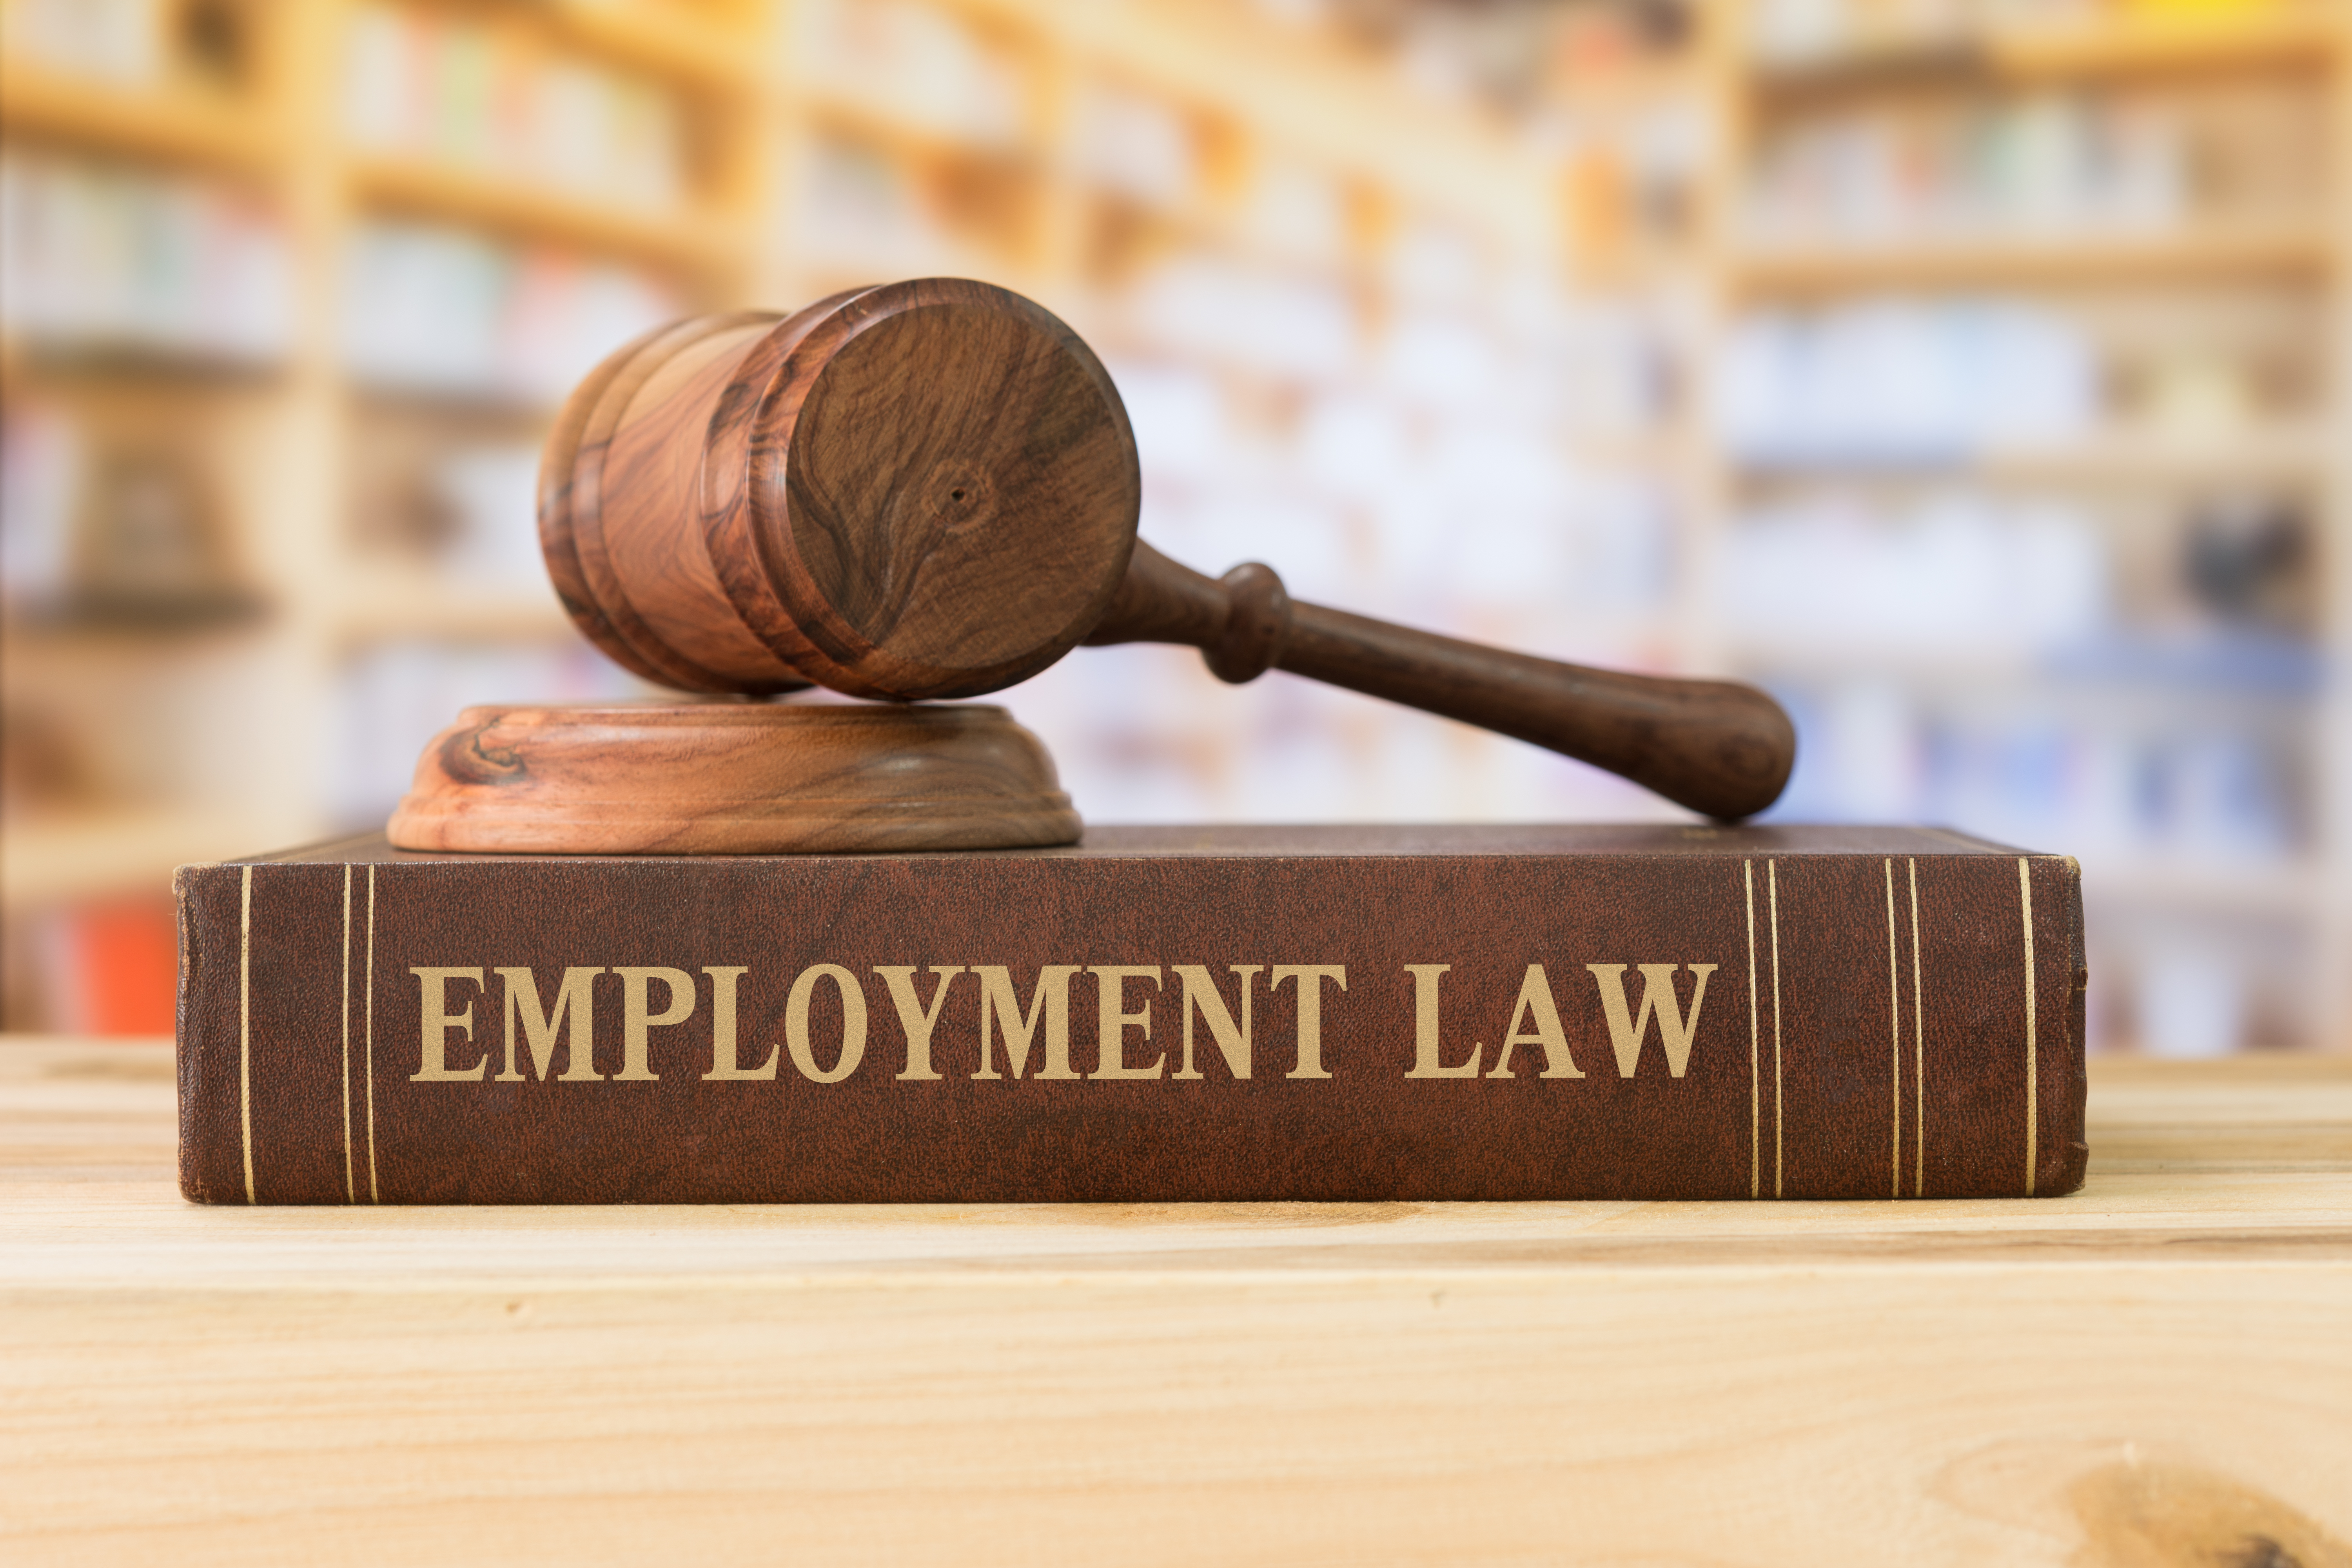 Gavel on employment law book